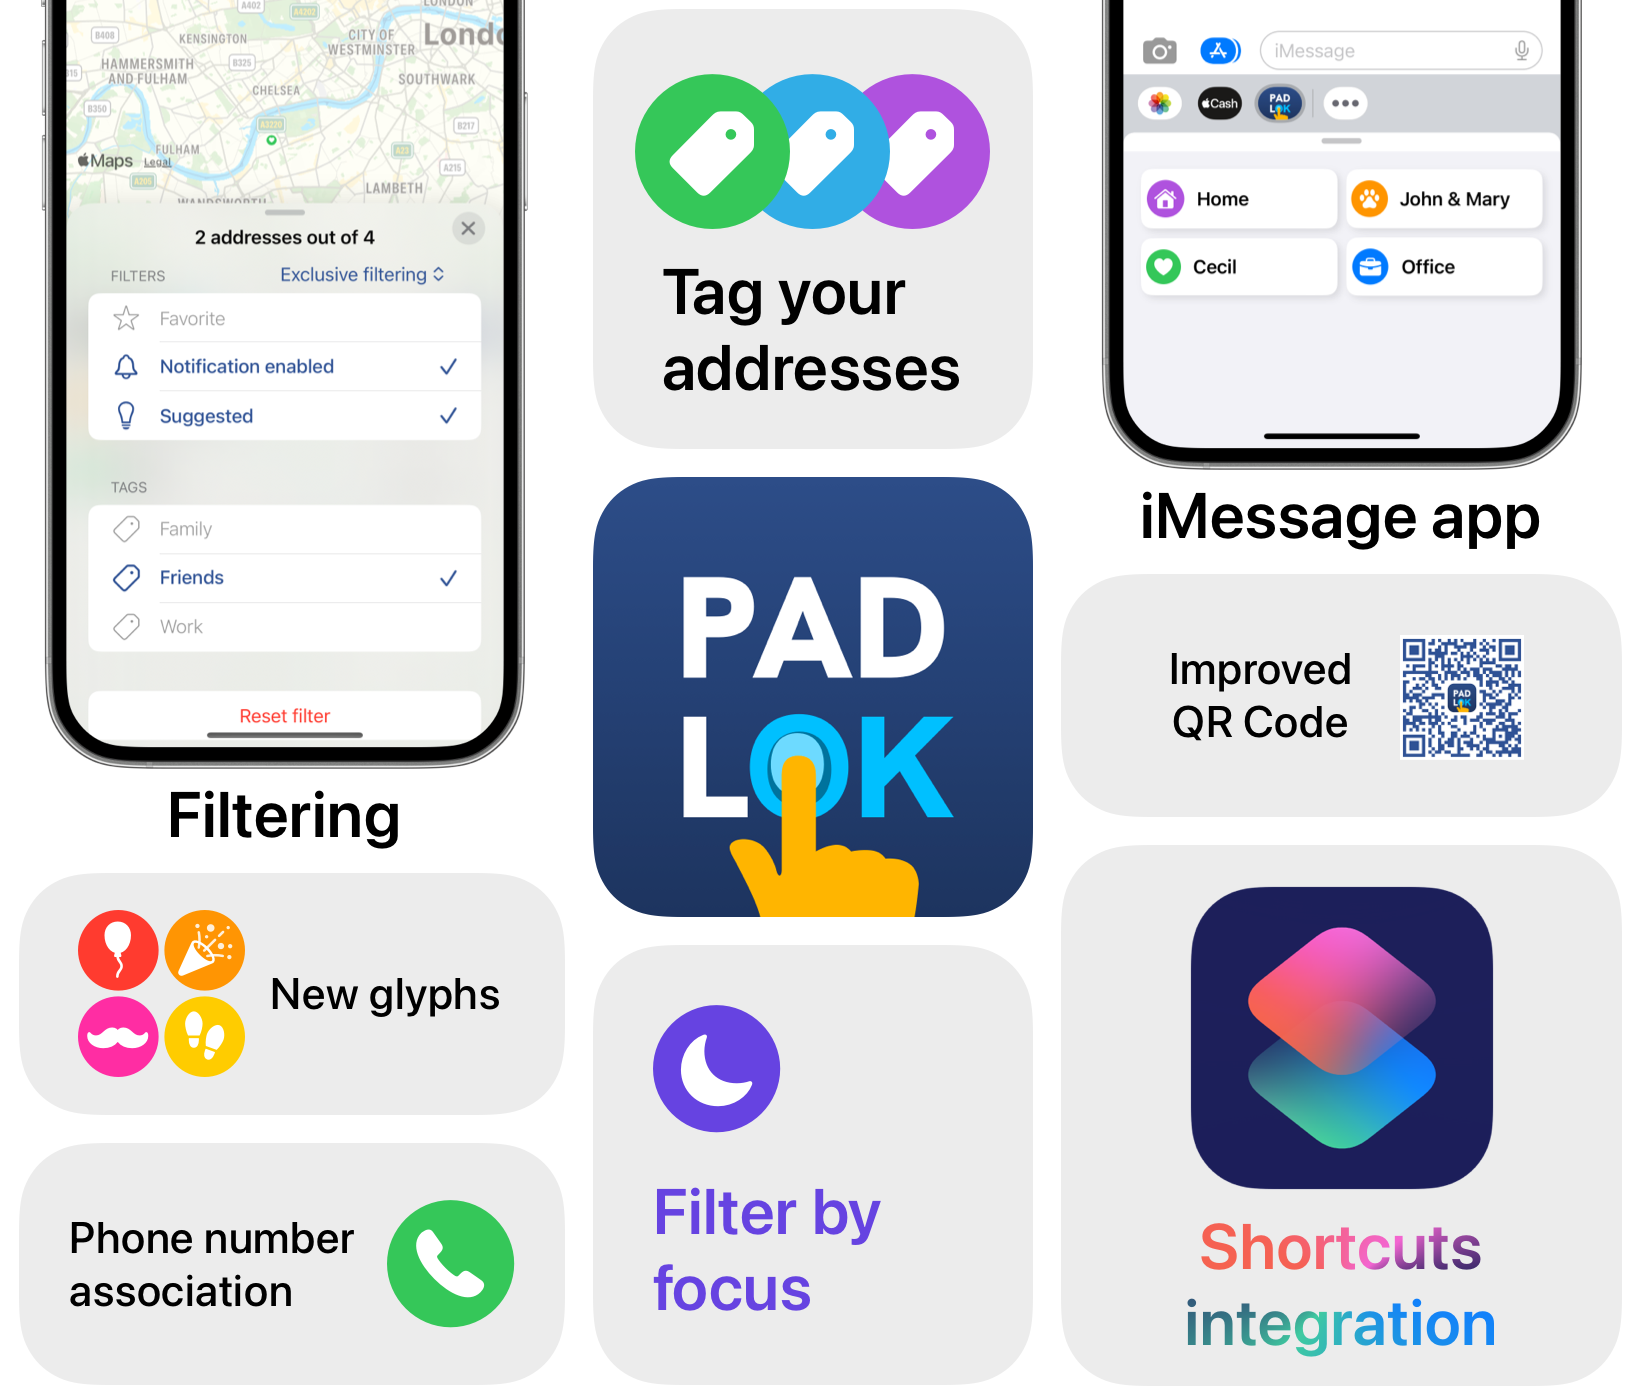 A marketing overview of all the new features for Padlok big update, including tag & filtering, iMessage app, and shortcut integration